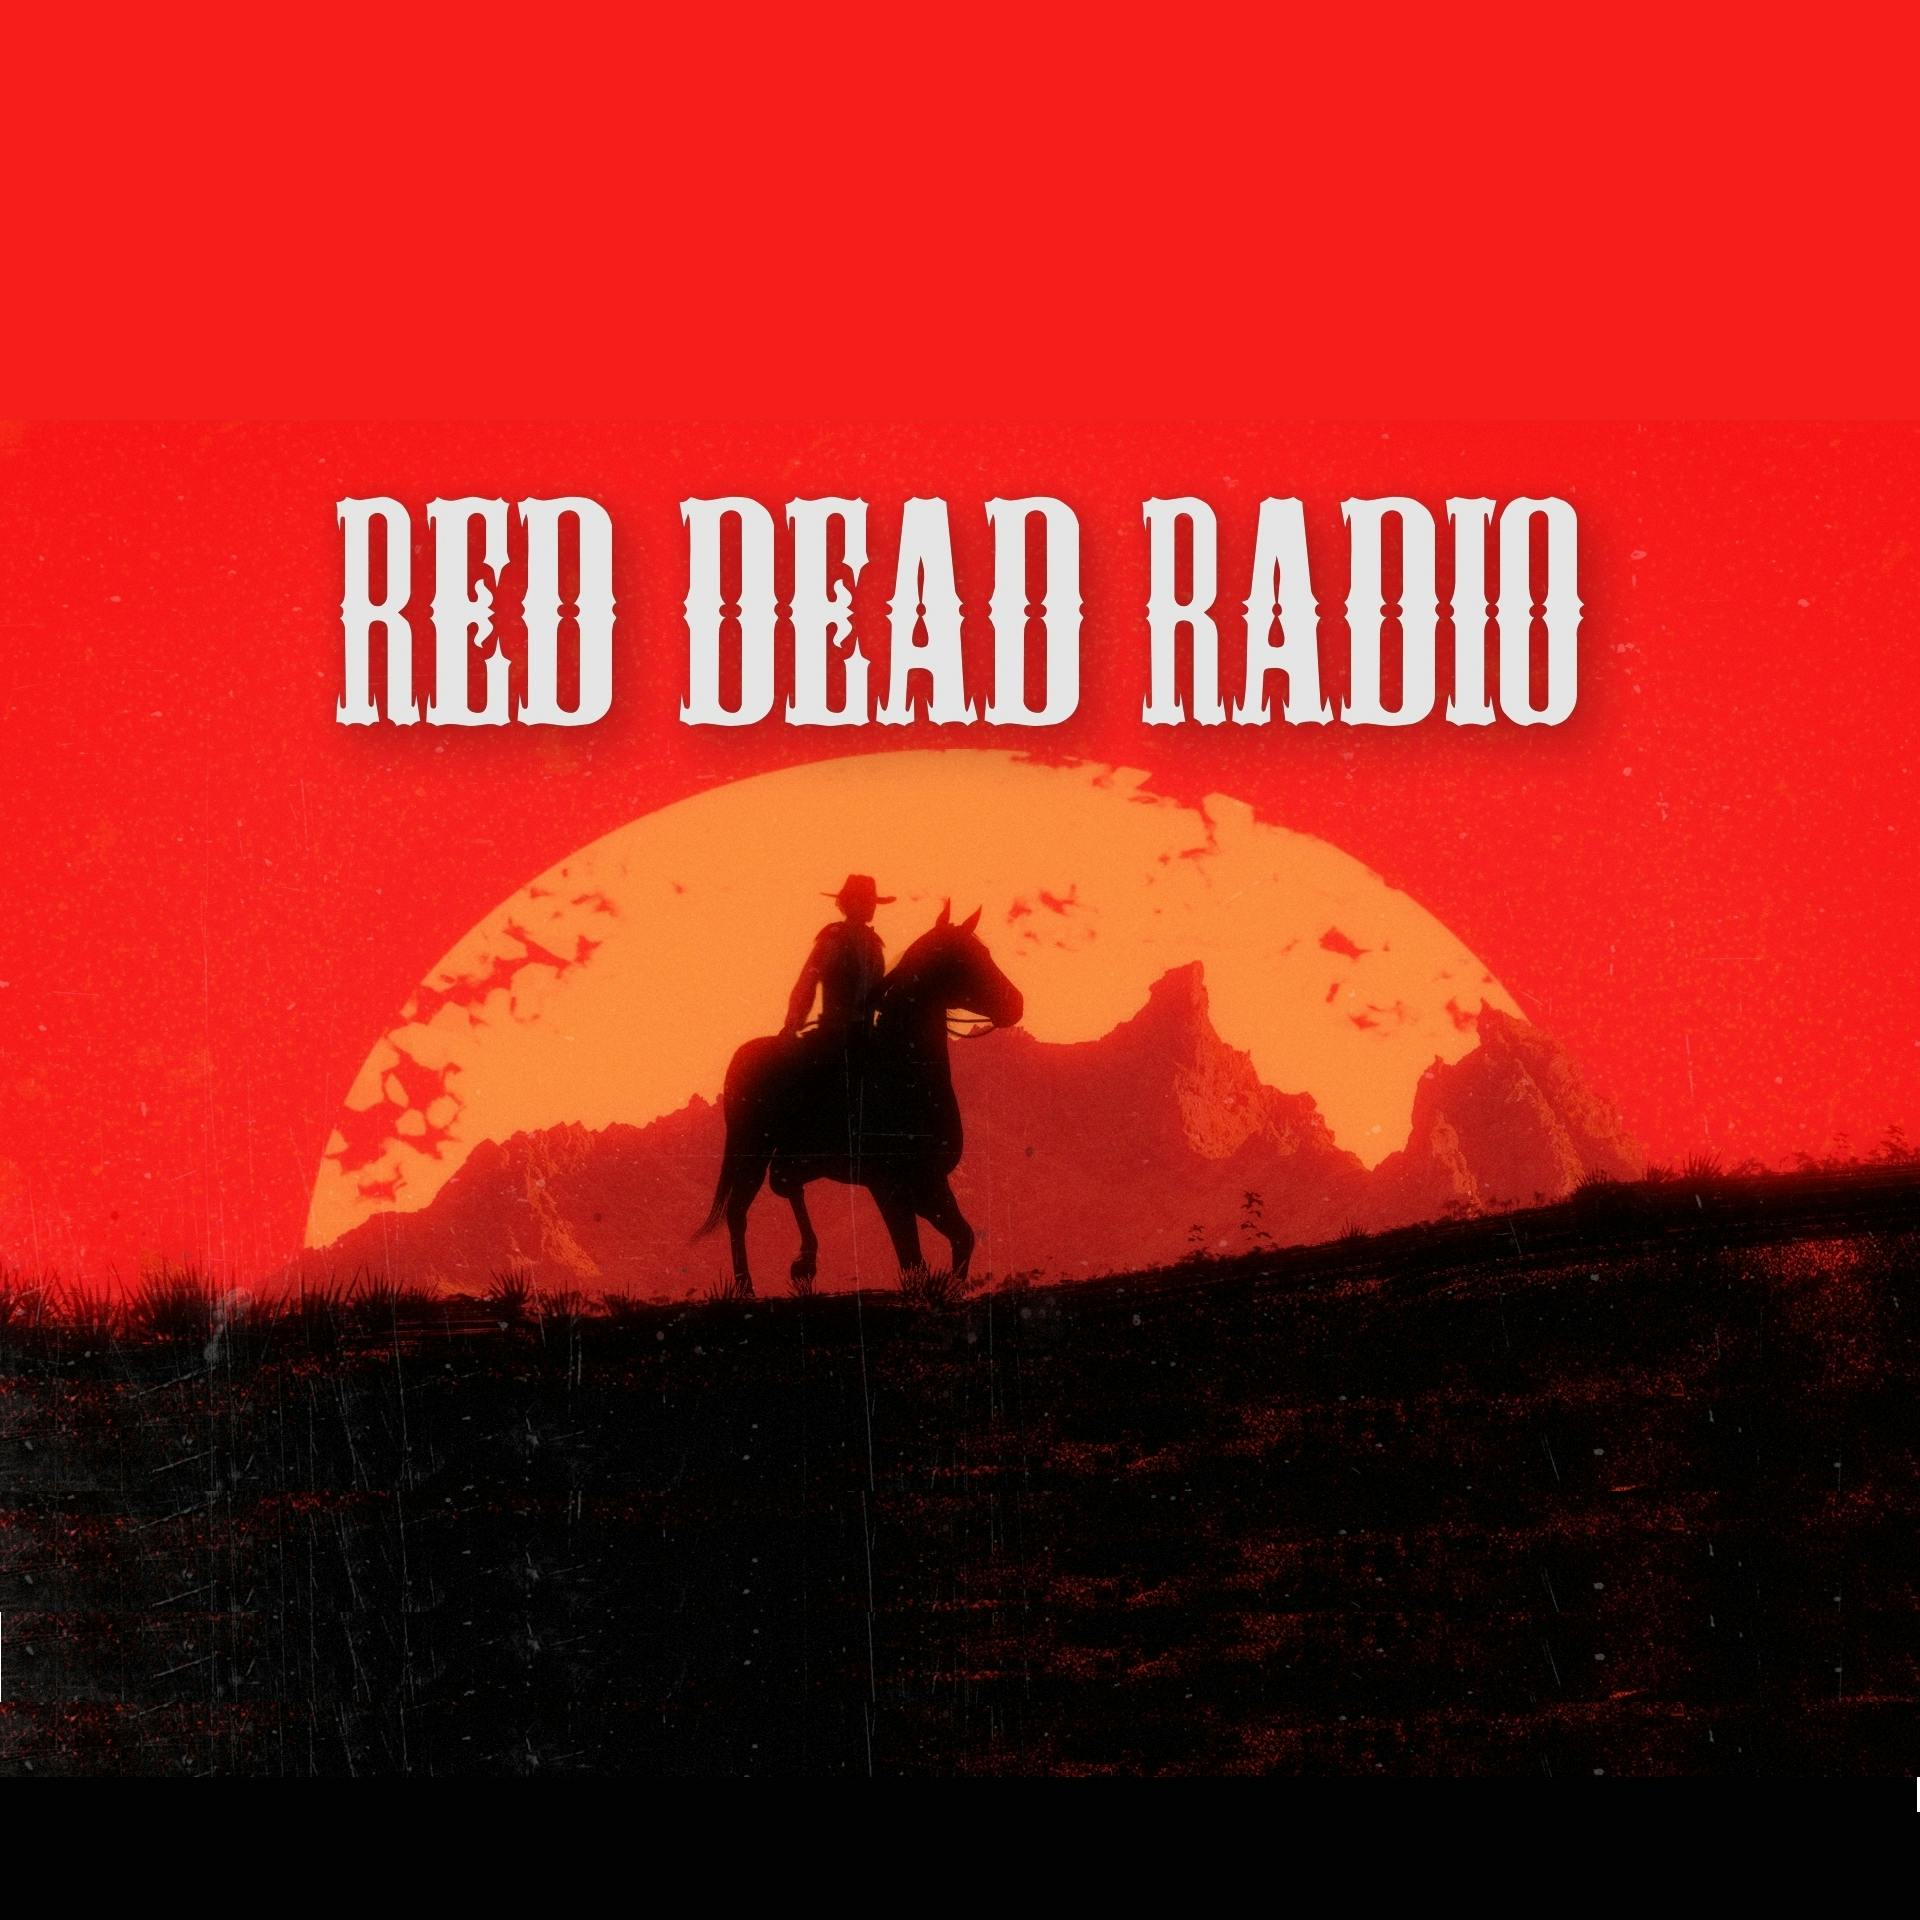 Free Gold Bars Are Here! - Red Dead Radio Ep. 34